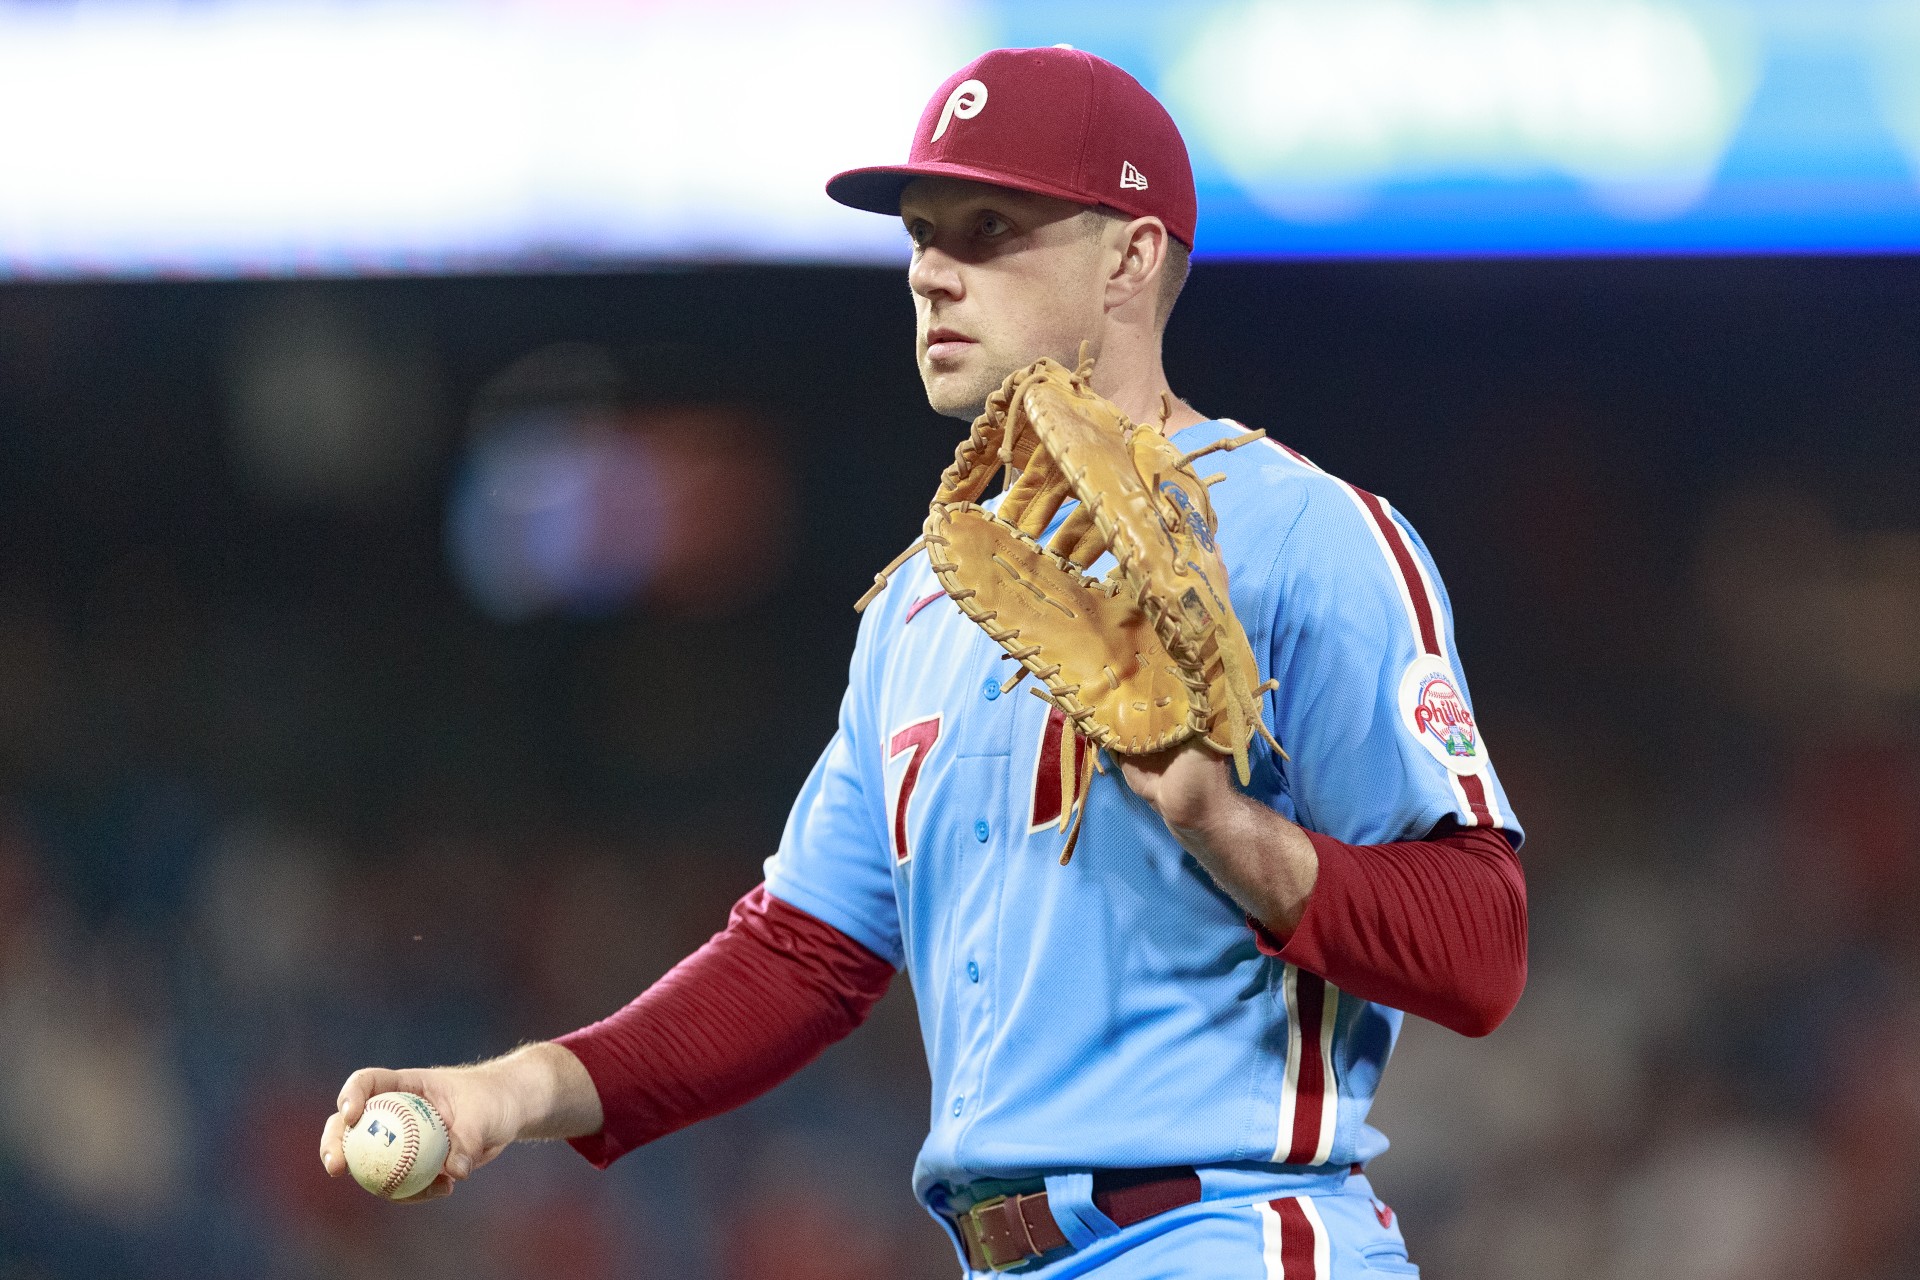 What might a Rhys Hoskins contract extension look like?